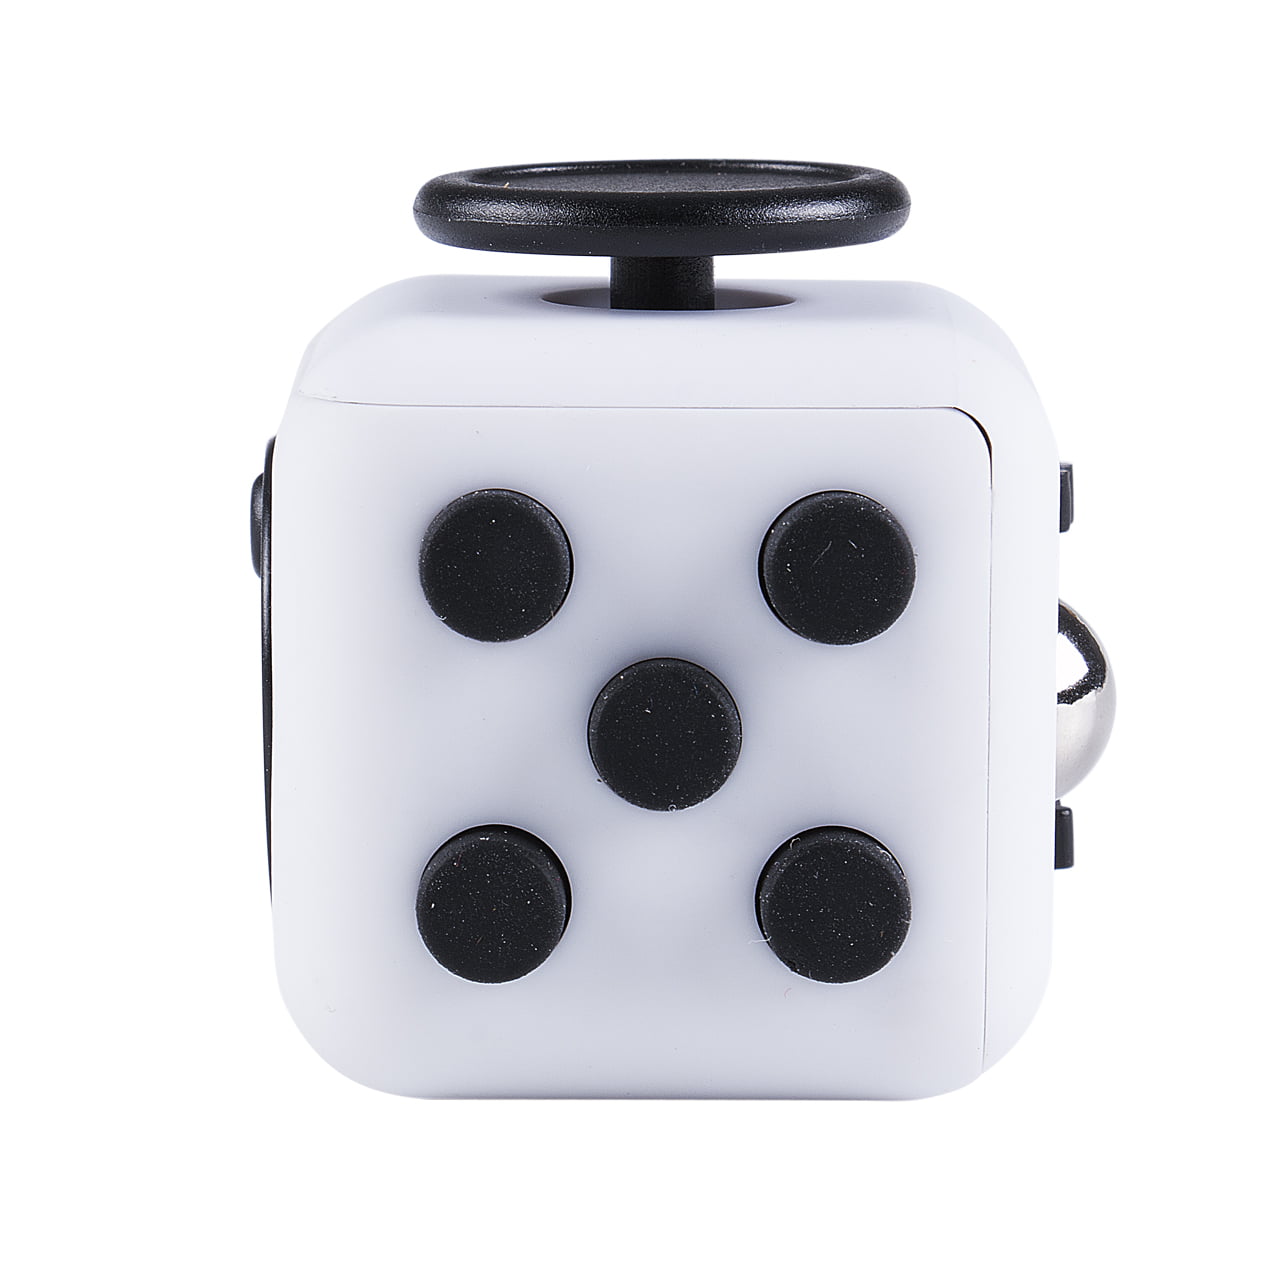 Fidget Cube Anxiety Stress Relief Focus 5 Color 6-side Gift Toys For Adults 